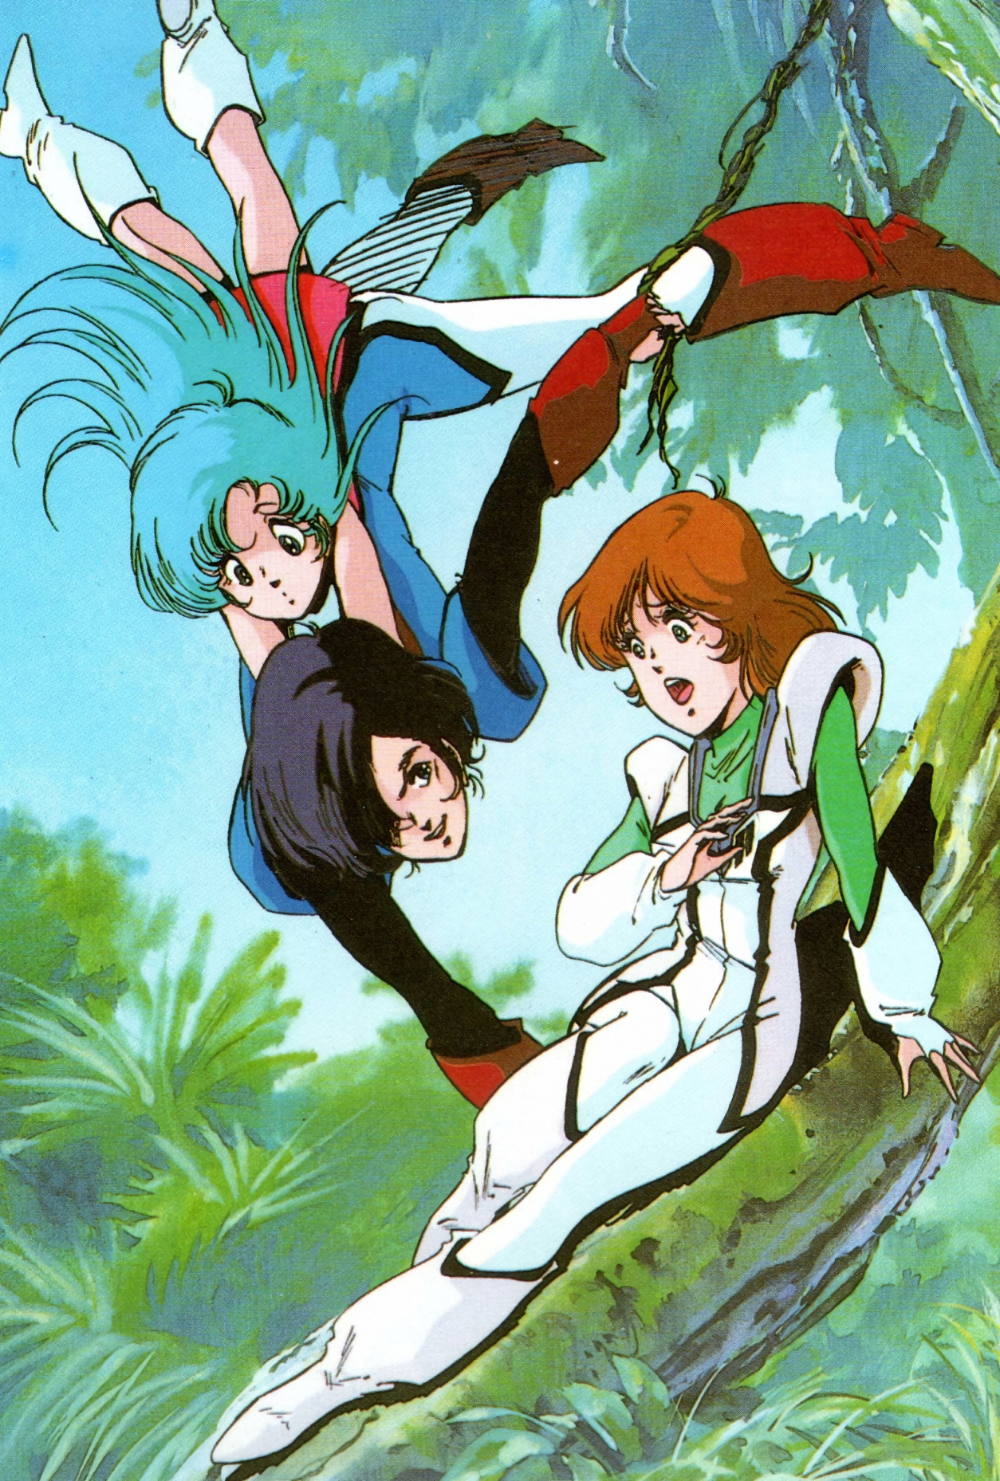 1980s_(style) 1boy 2girls amused android black_hair bodysuit boots brown_hair child choujikuu_seiki_orguss dress emaan falling fingerless_gloves forest gloves highres holding jumping jungle katsuragi_kei lying mikimoto_haruhiko mimsy_raas mome_(orguss) mullet multiple_girls nature official_art official_style orguss pilot_suit production_art promotional_art retro_artstyle riding scan scared science_fiction skirt source_request traditional_media tree tree_stump uniform